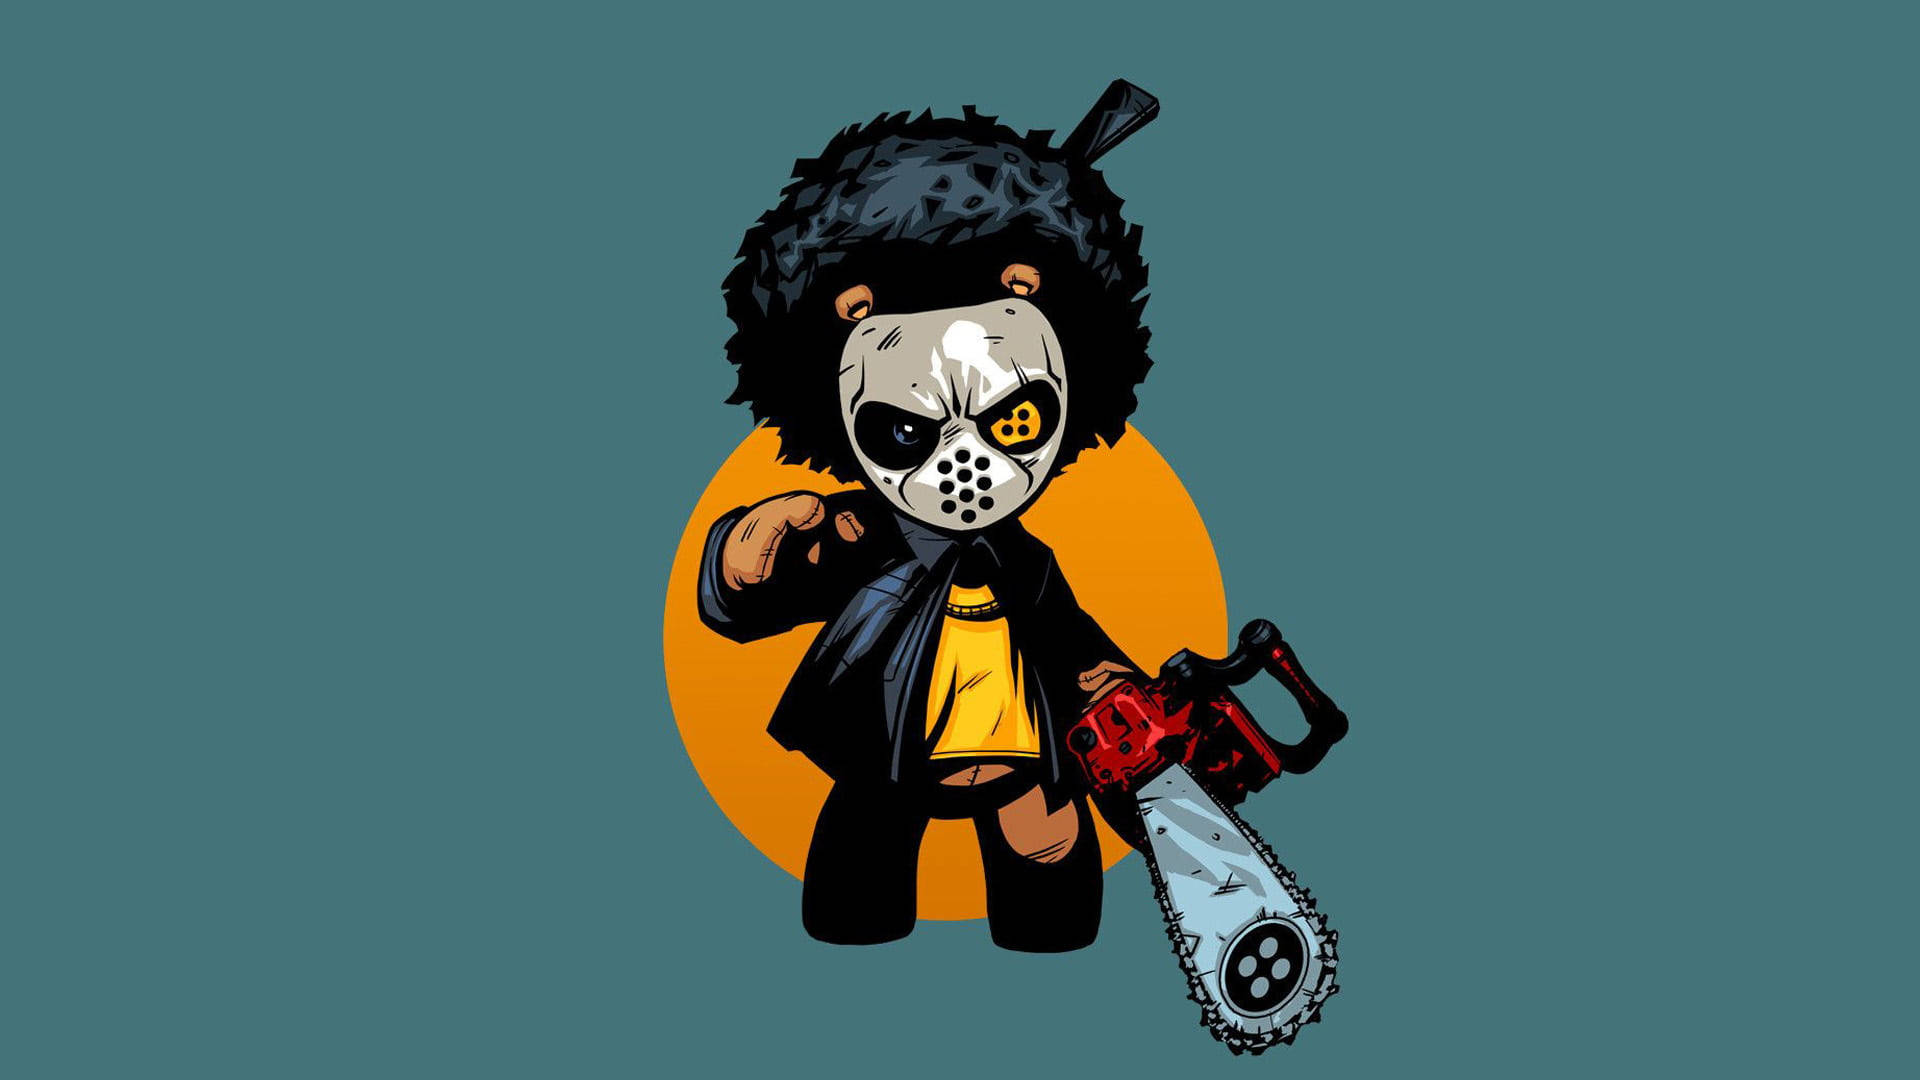 Download Teddy Bear Gangster Cartoon With Chainsaw Wallpaper